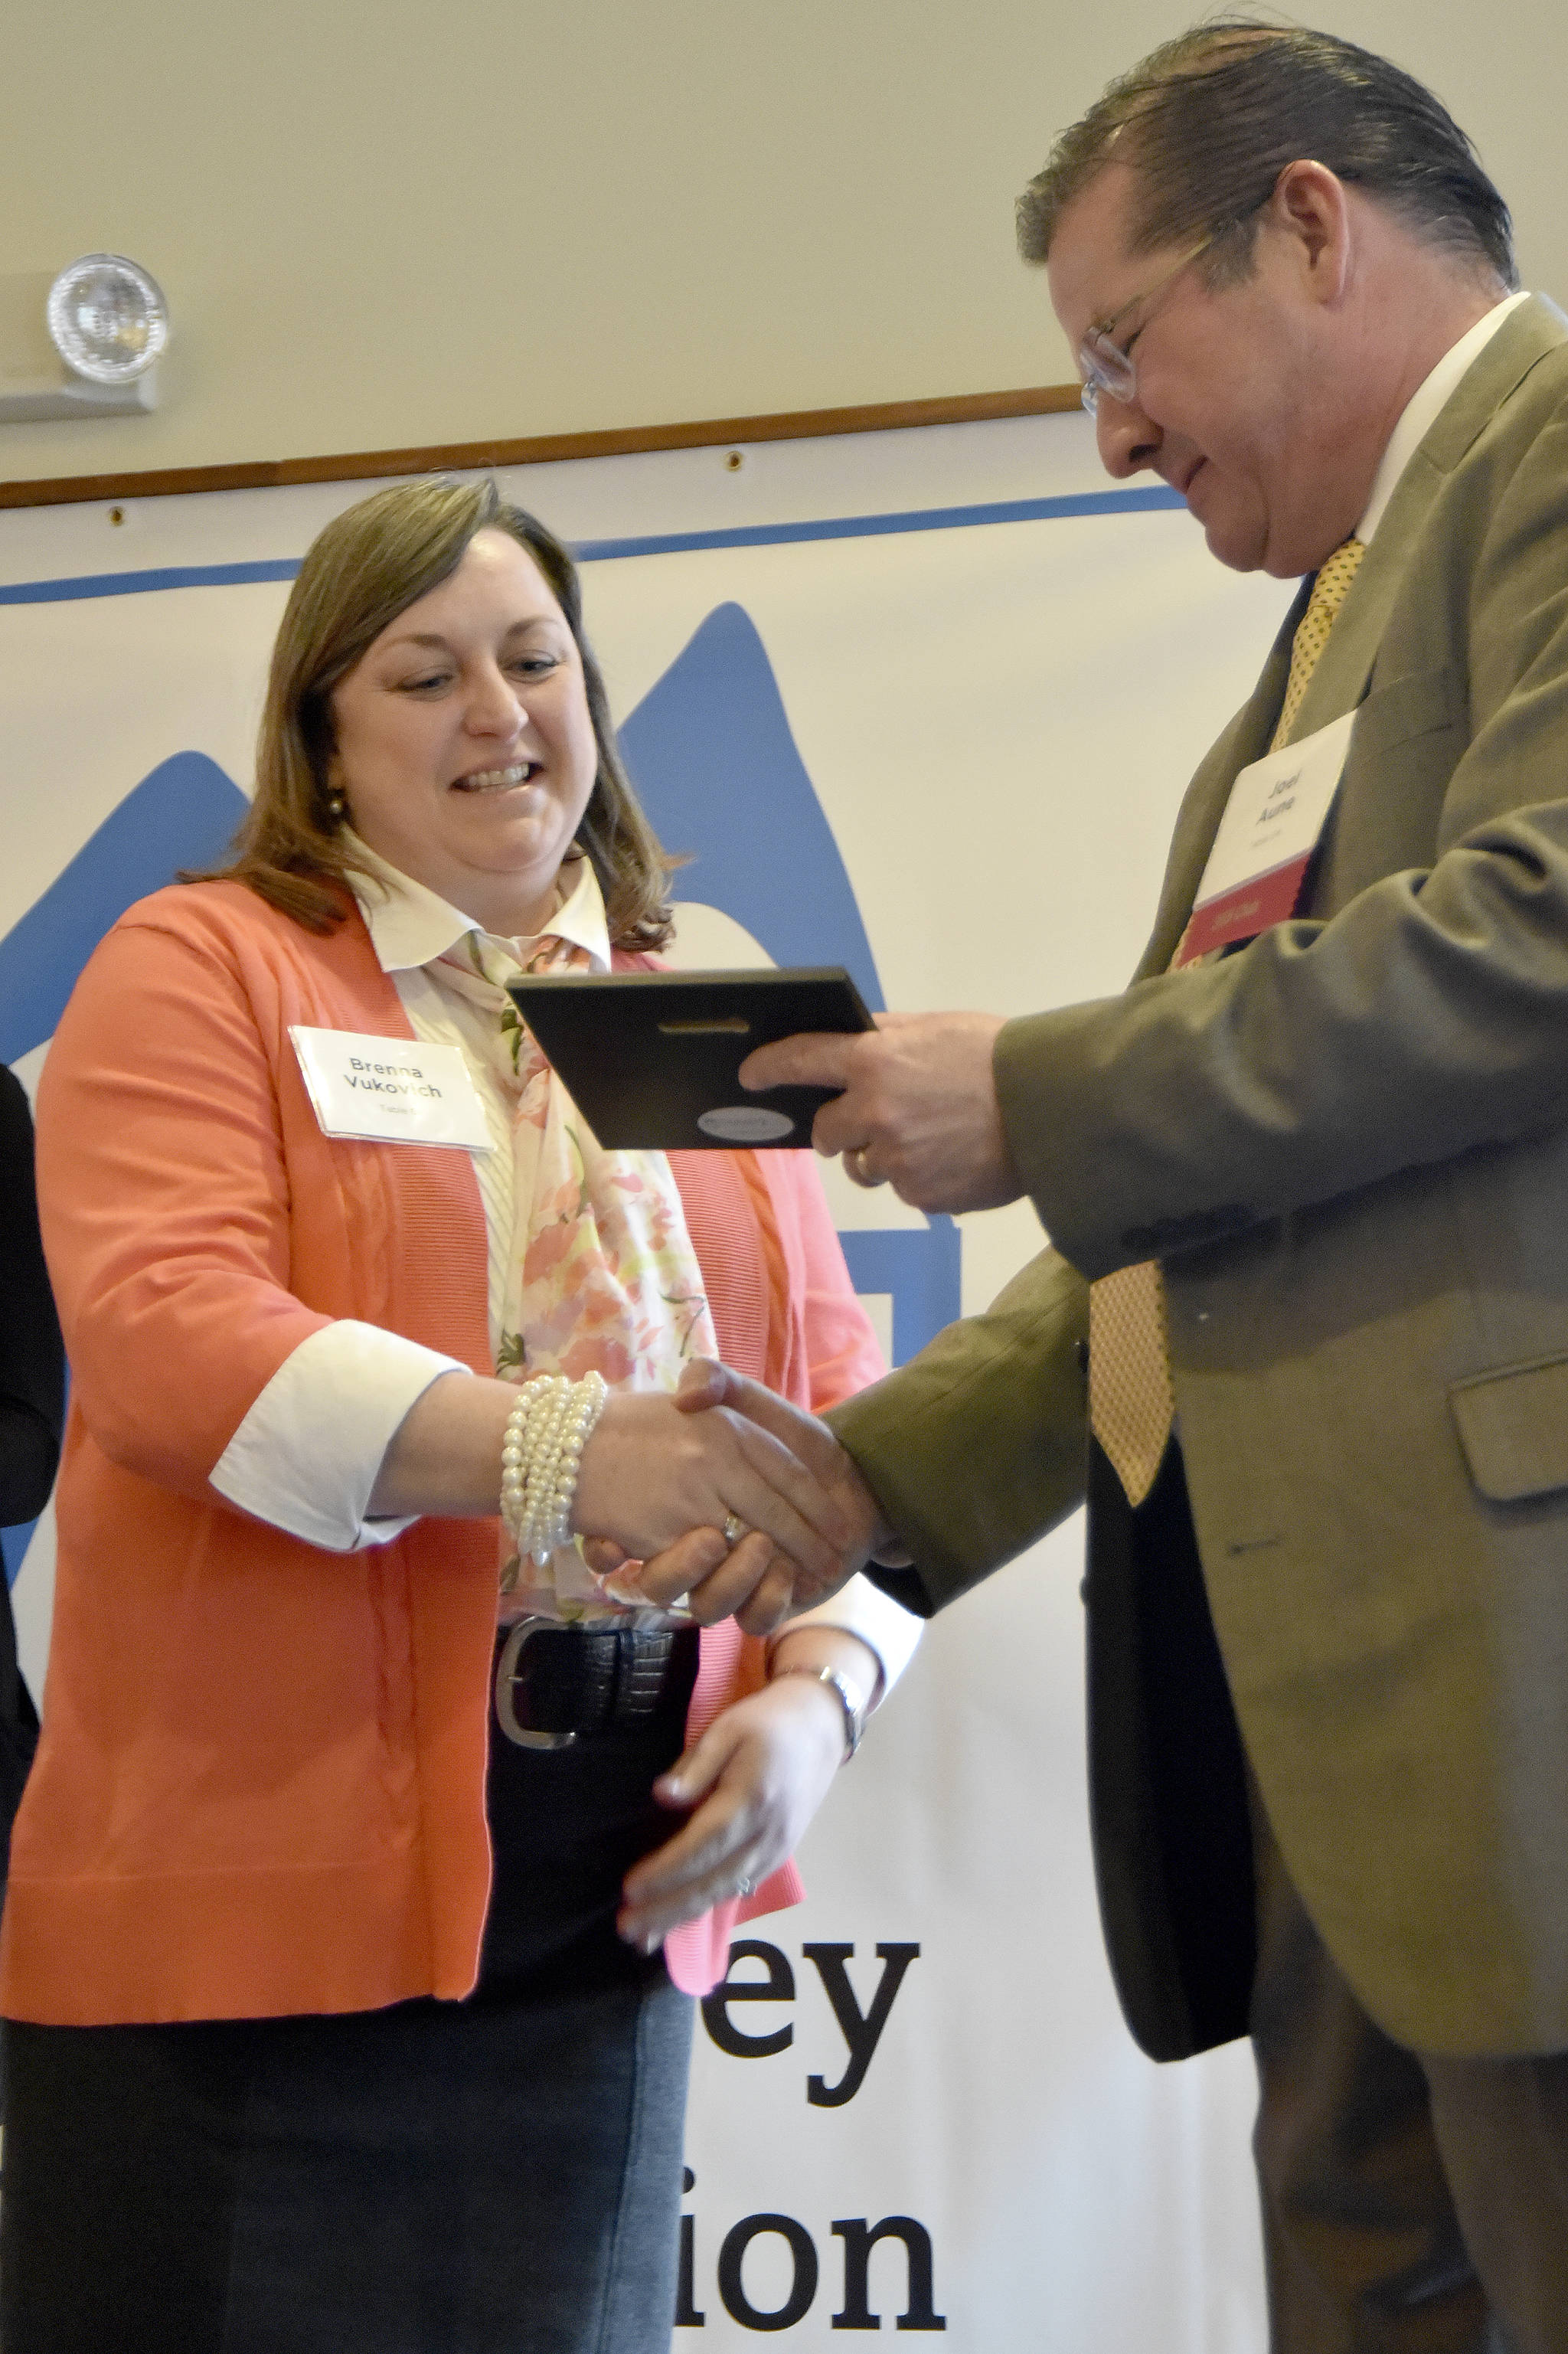 Brenna Vukovich accepts the Classified Educator of the Year award from Snoqualmie Valley School District Superintendent Joel Aune March 23 at the Snoqualmie Valley Schools Foundation luncheon. Carol Ladwig/Staff Photo